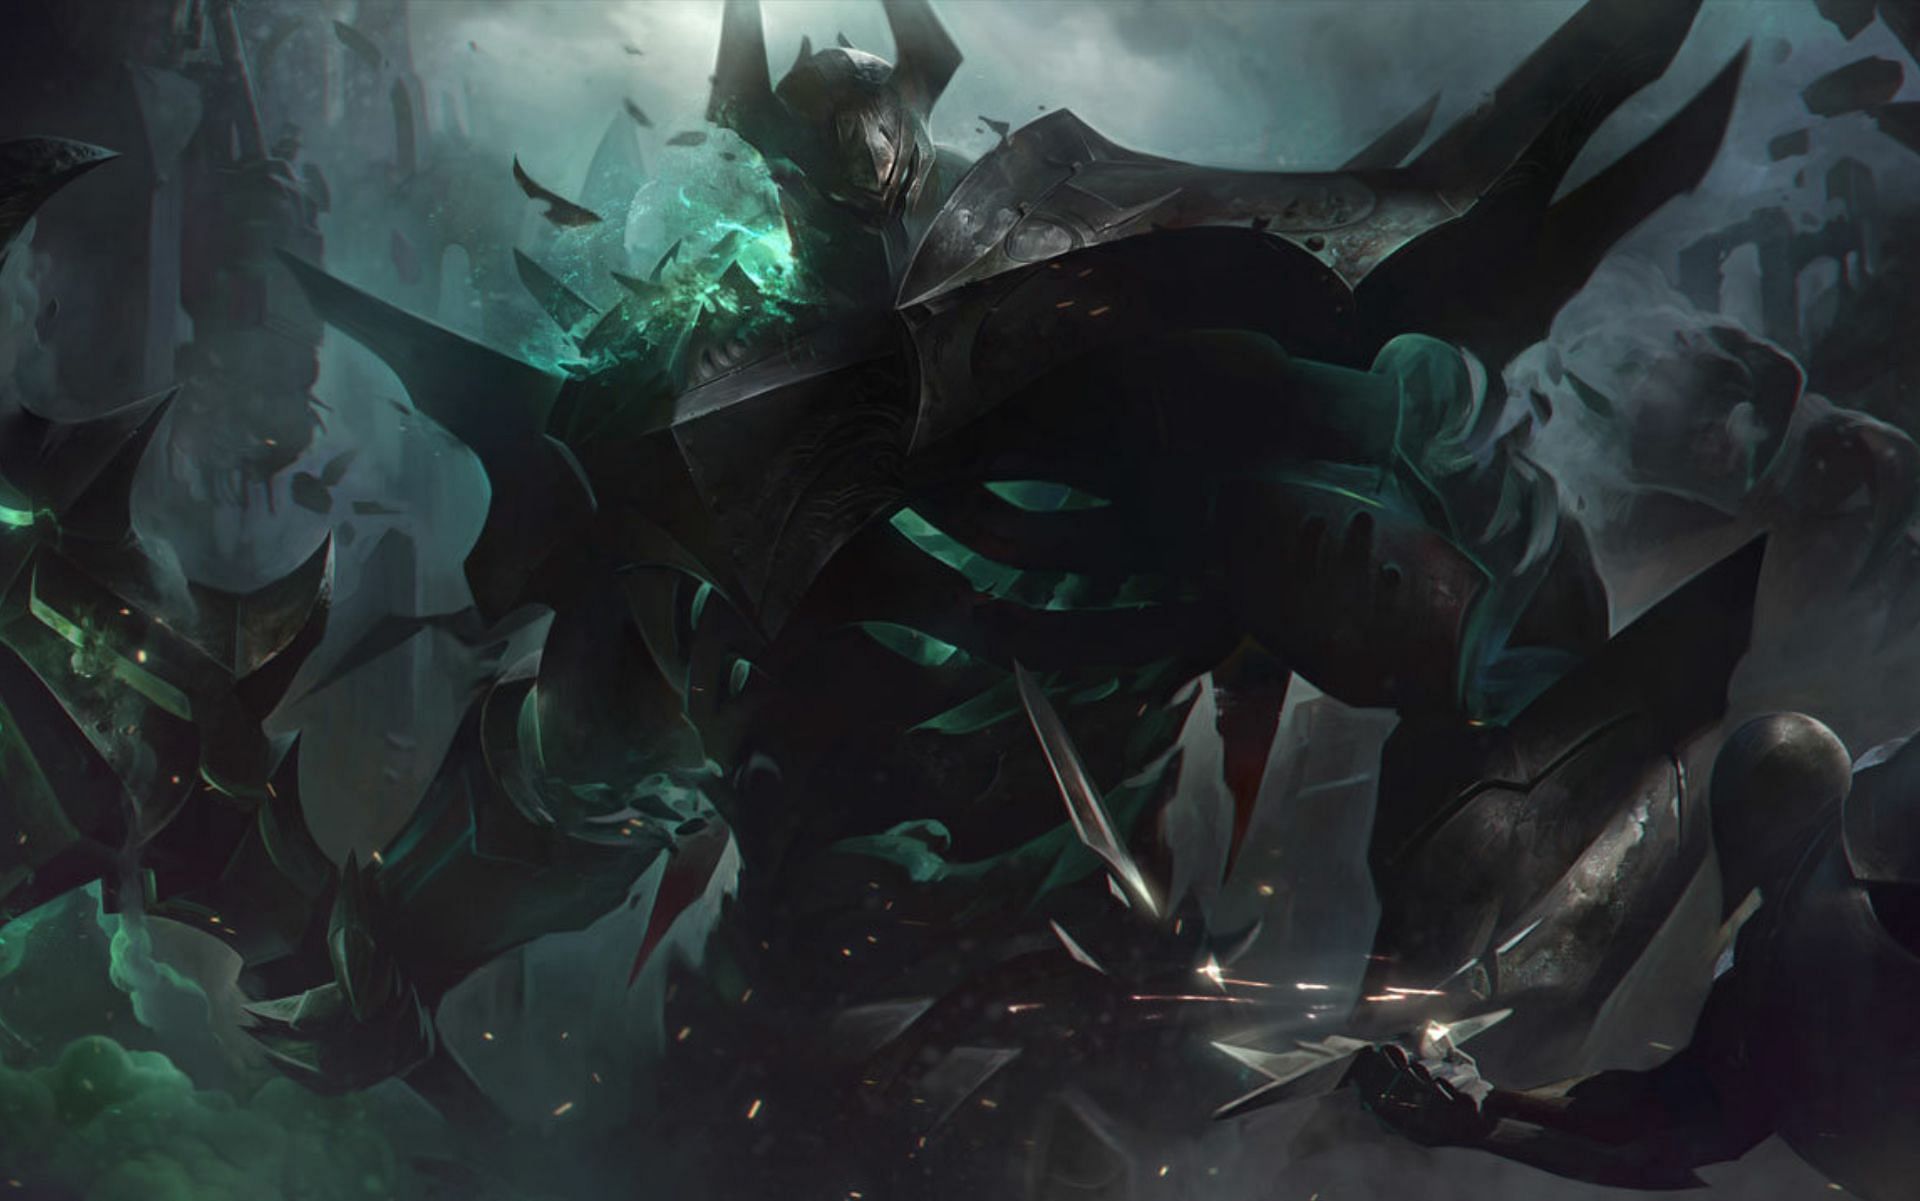 Mordekaiser will be featured as the next champion as part of the Ashen Knight skinline (Image via Riot Games)